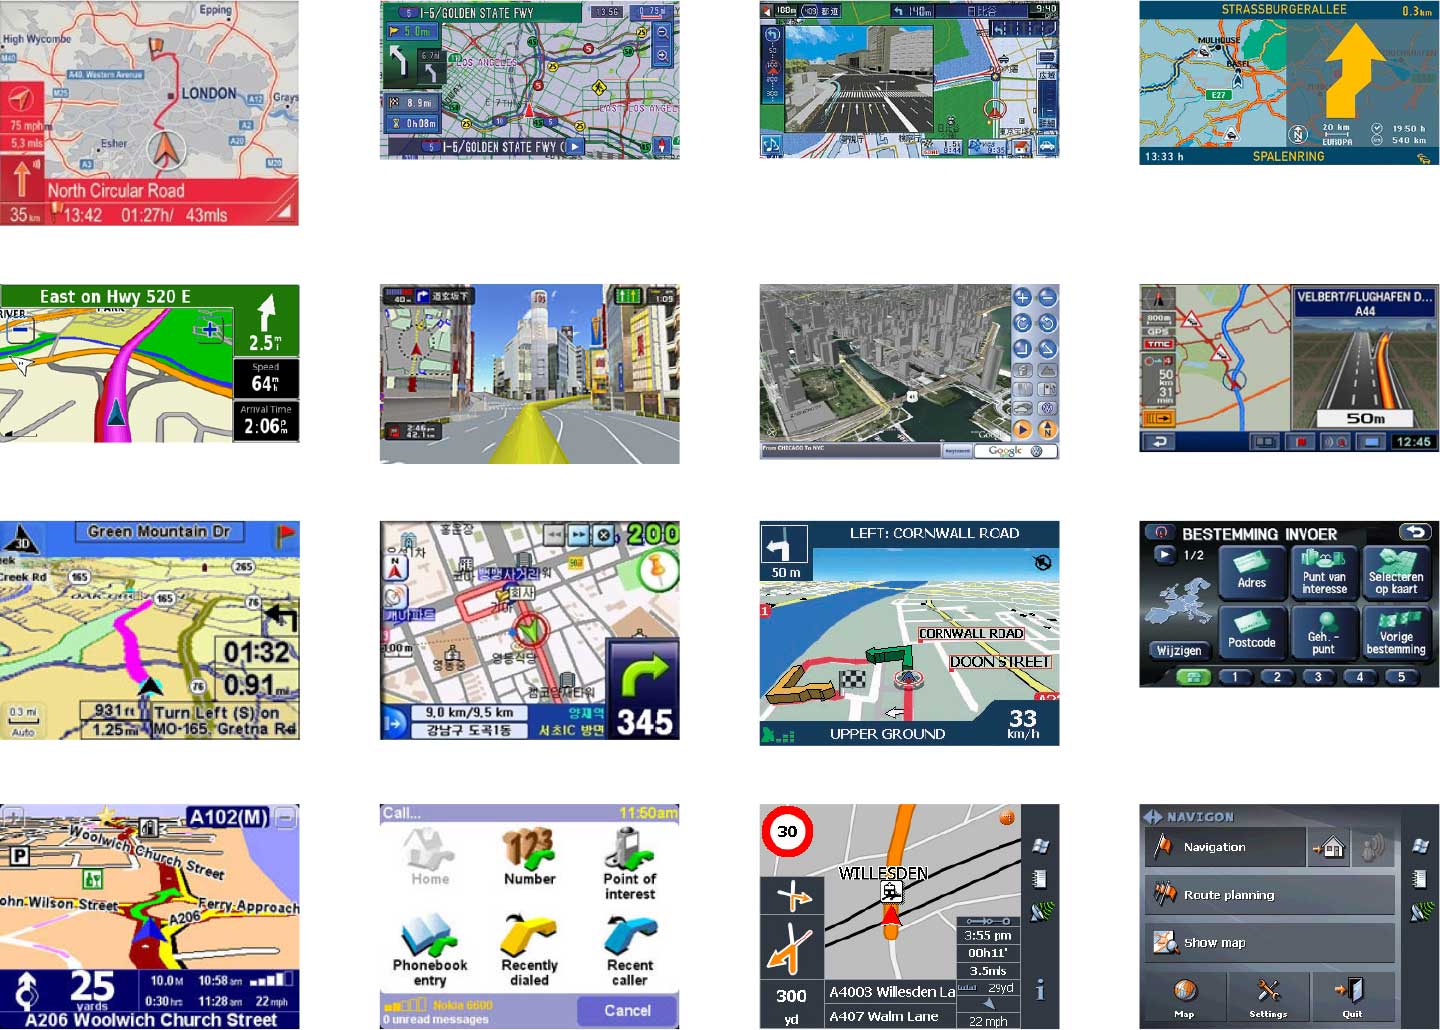 Screenshots from competitor navigation devices